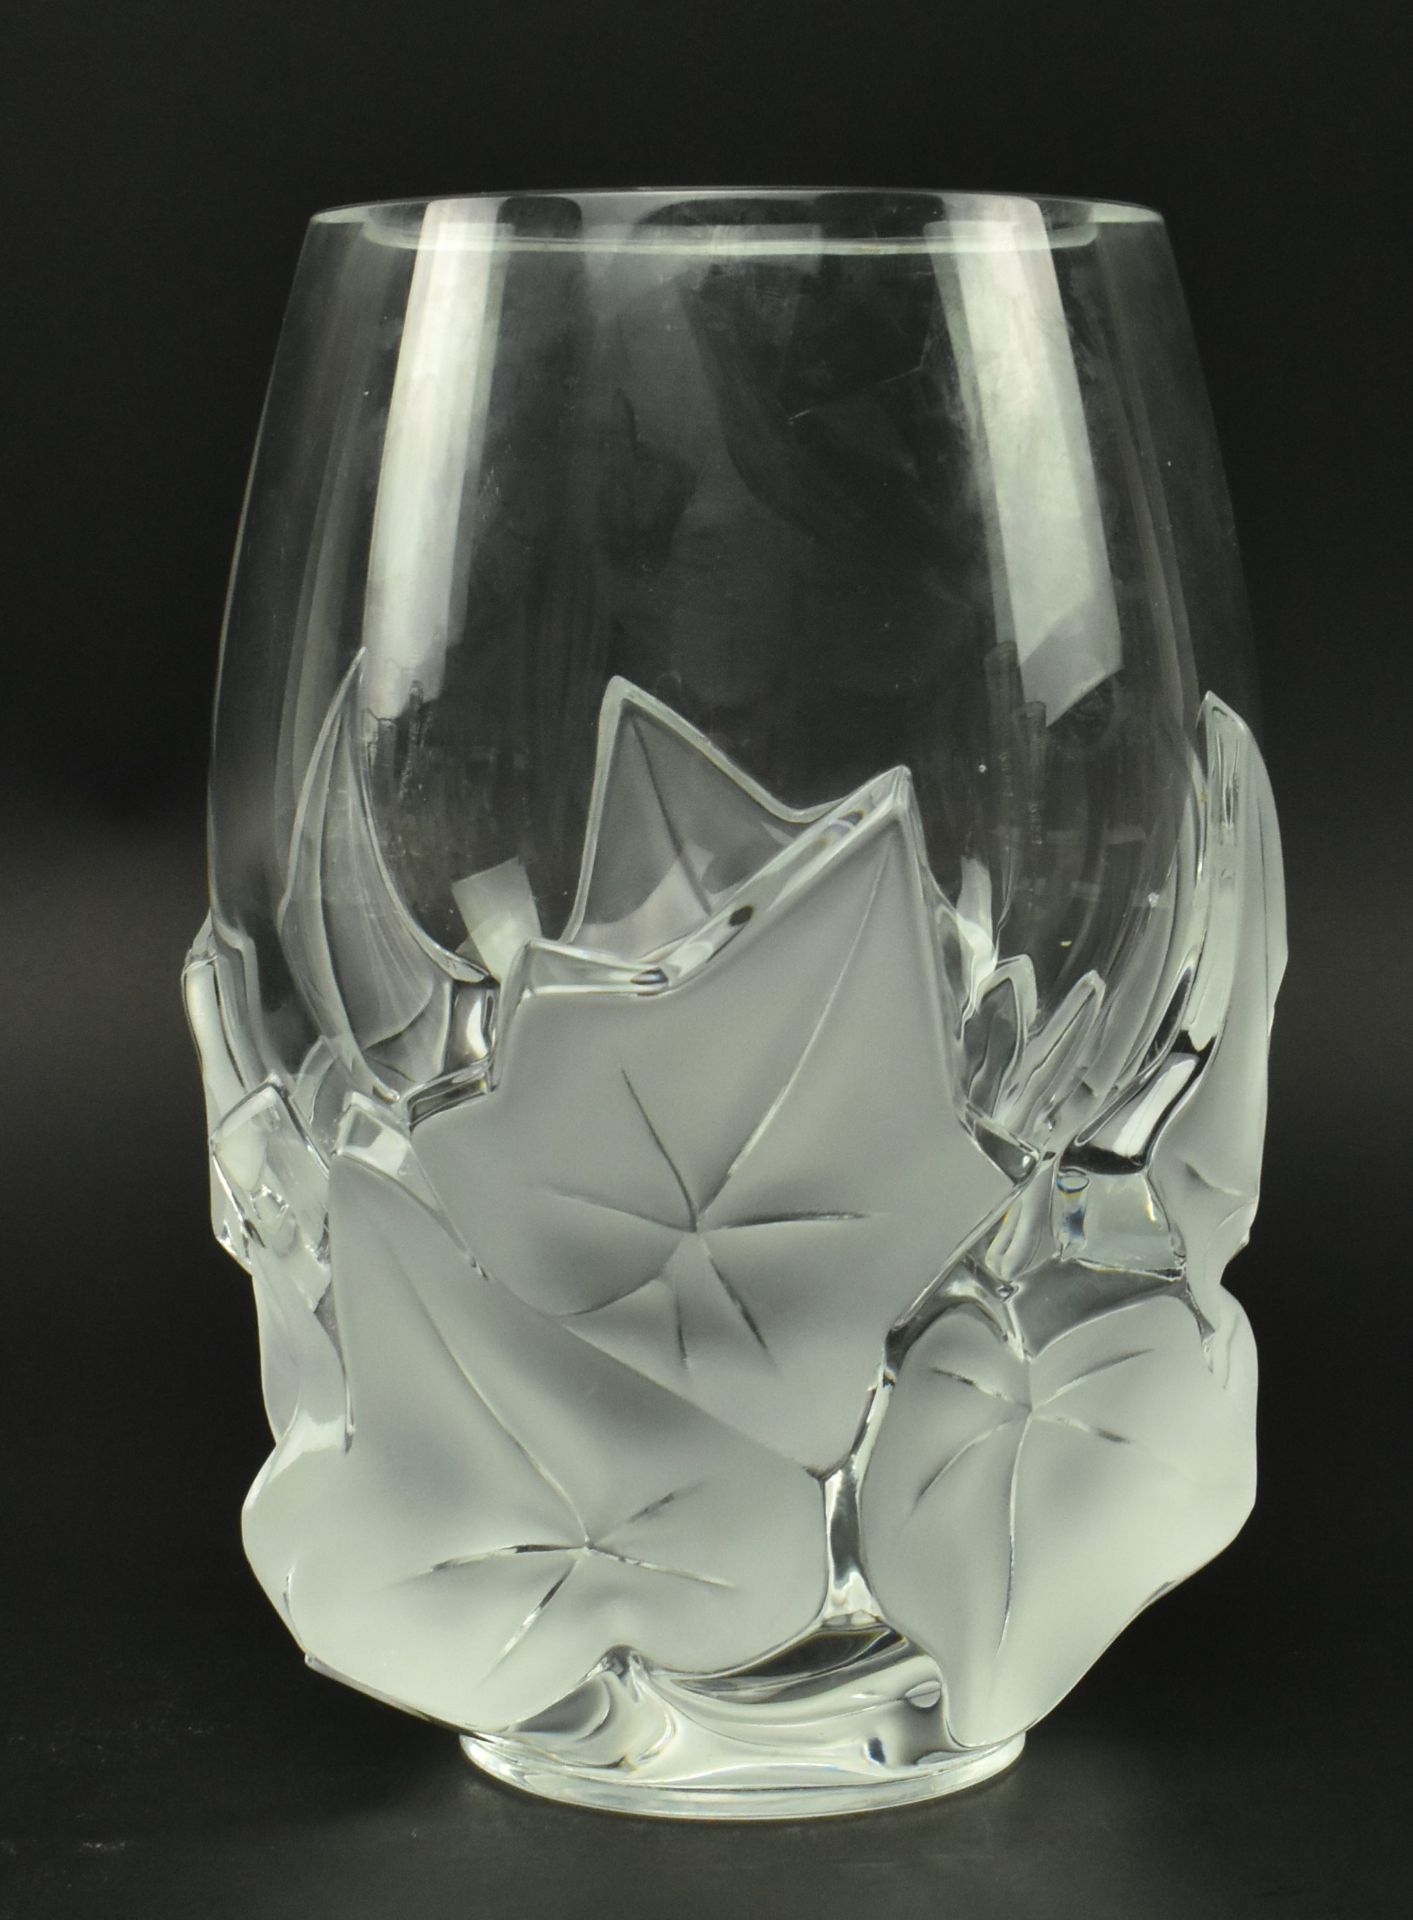 LALIQUE, FRANCE - MID 20TH CENTURY HEDERA GLASS VASE